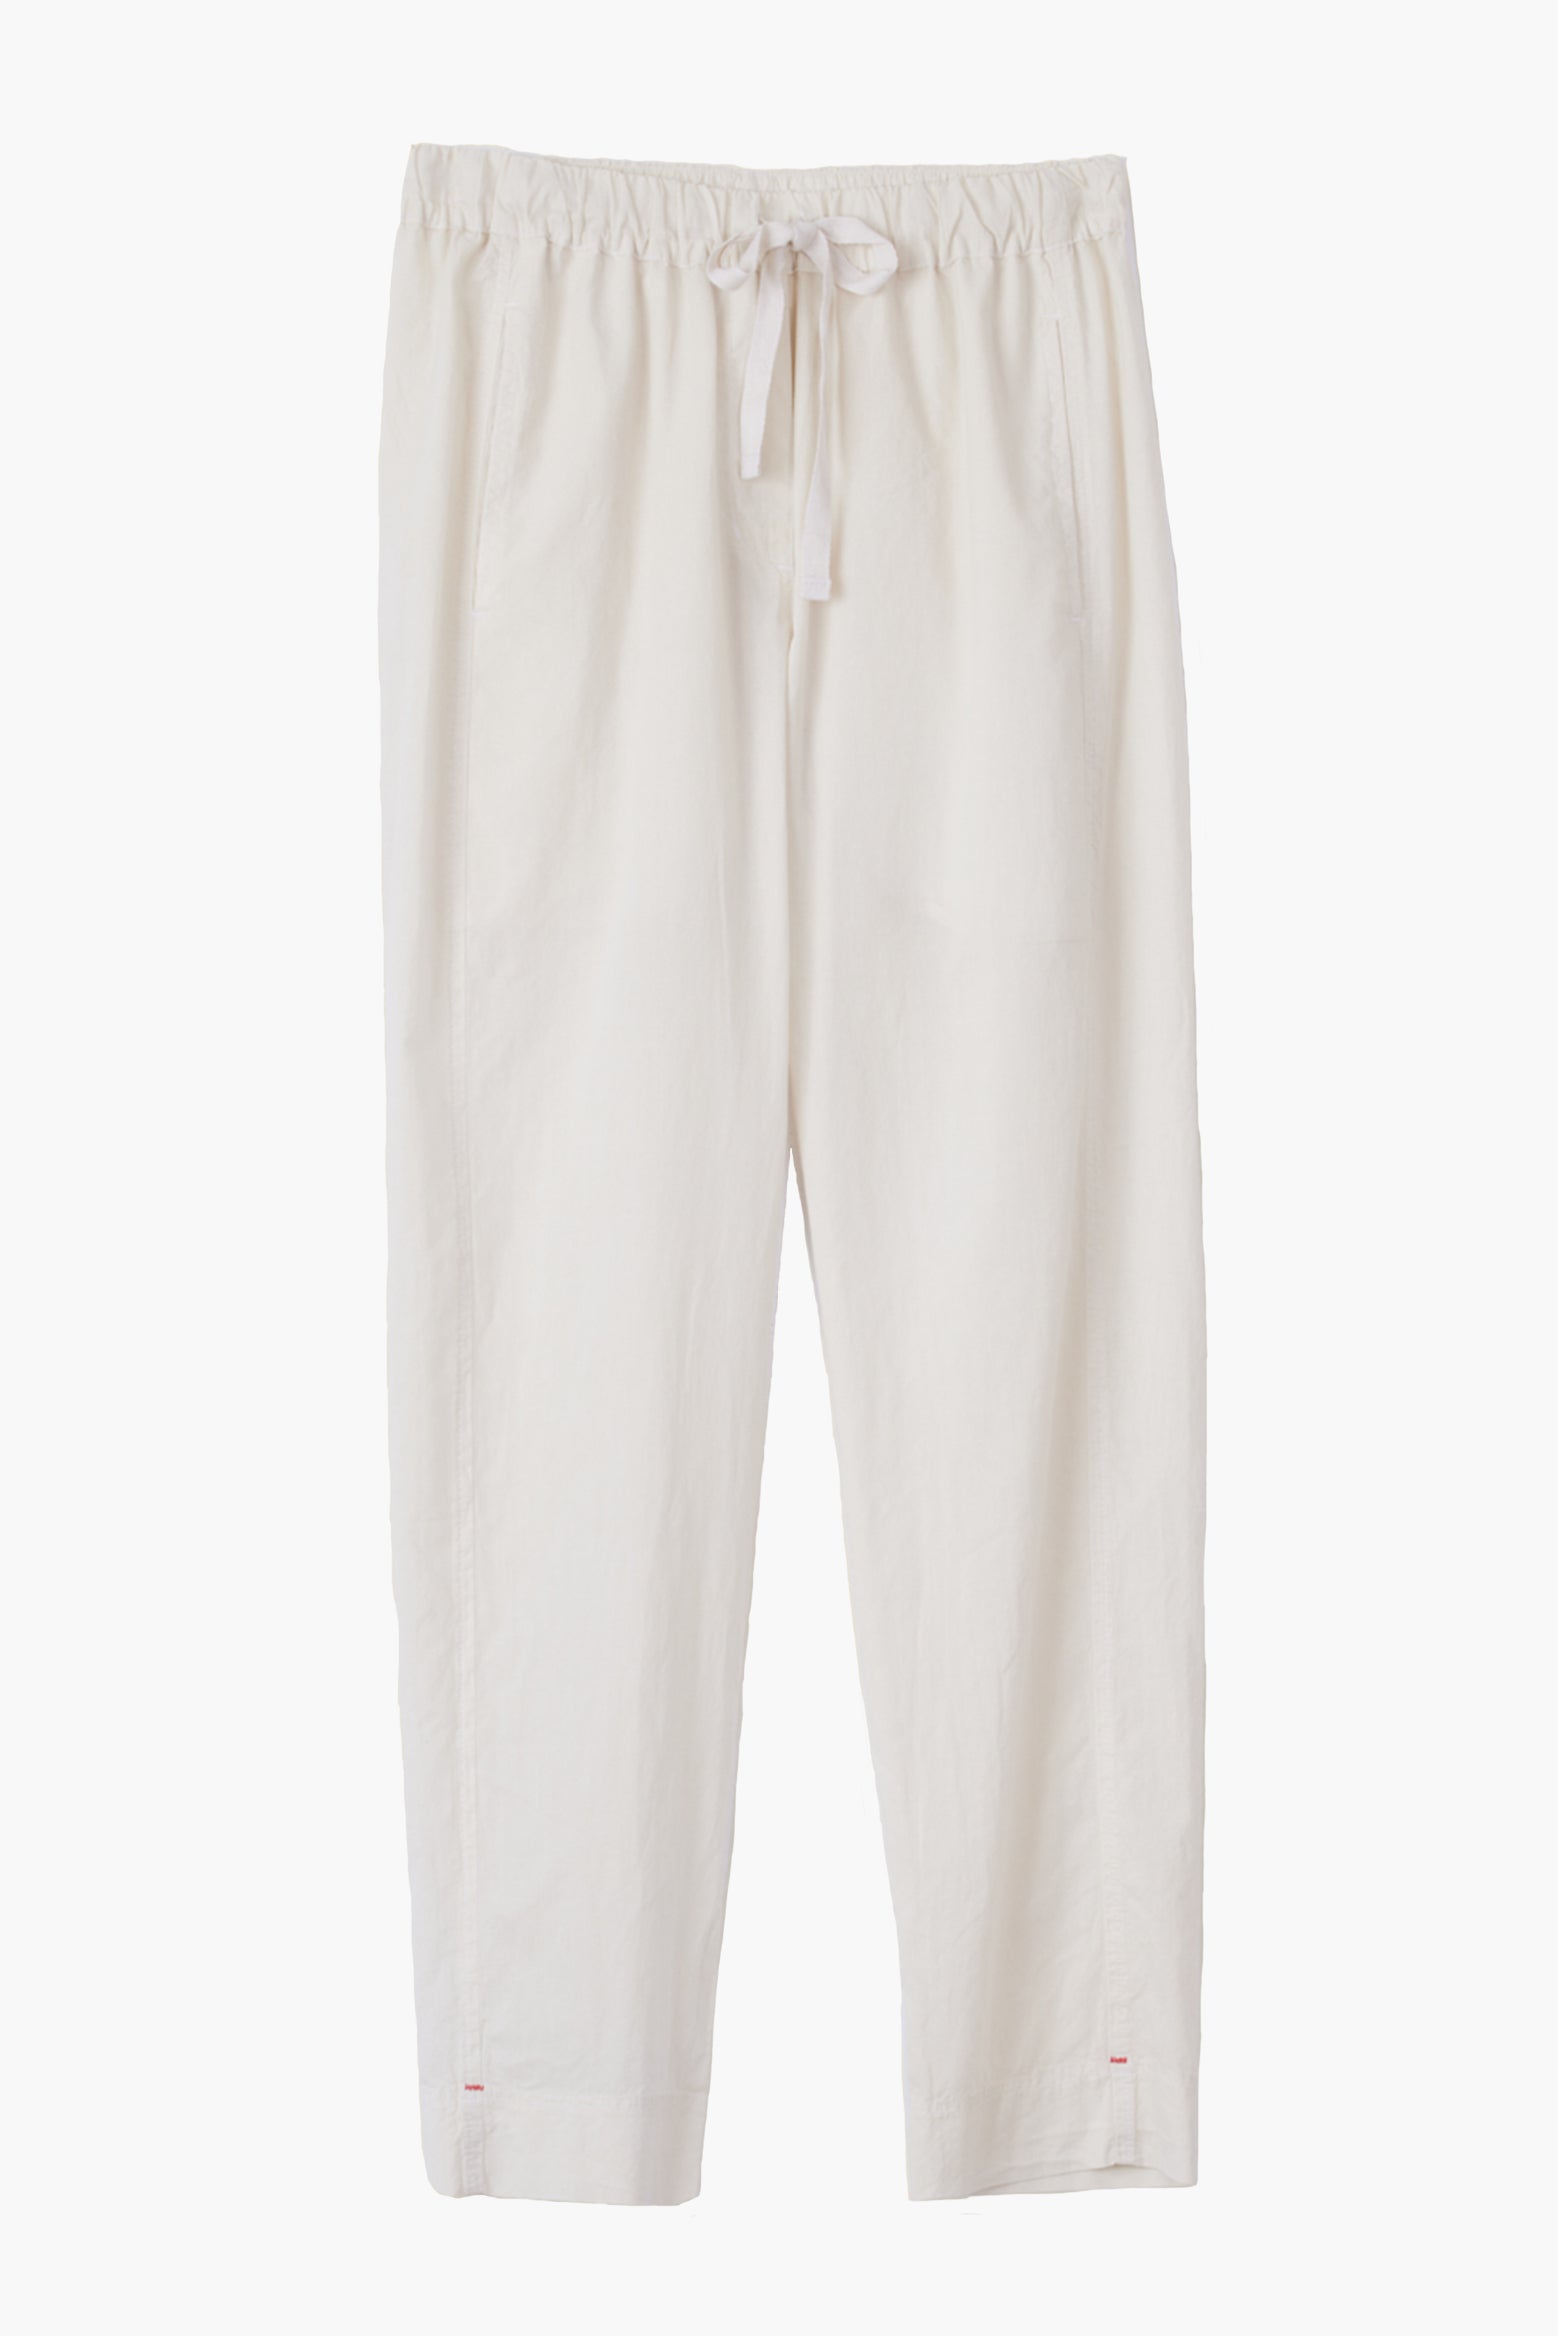 The Xirena Draper Pant in Sand available at The New Trend Australia